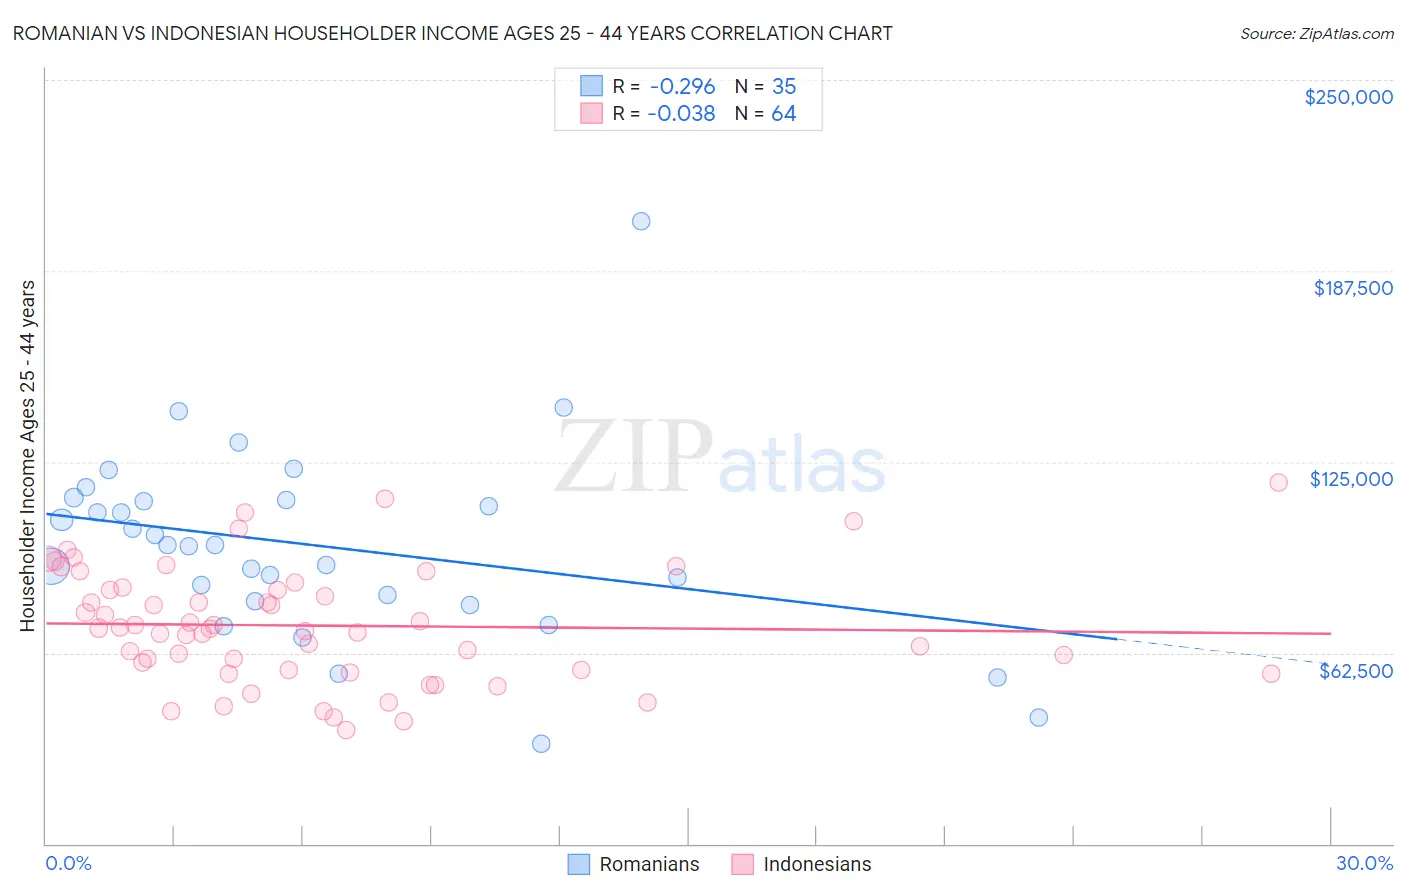 Romanian vs Indonesian Householder Income Ages 25 - 44 years